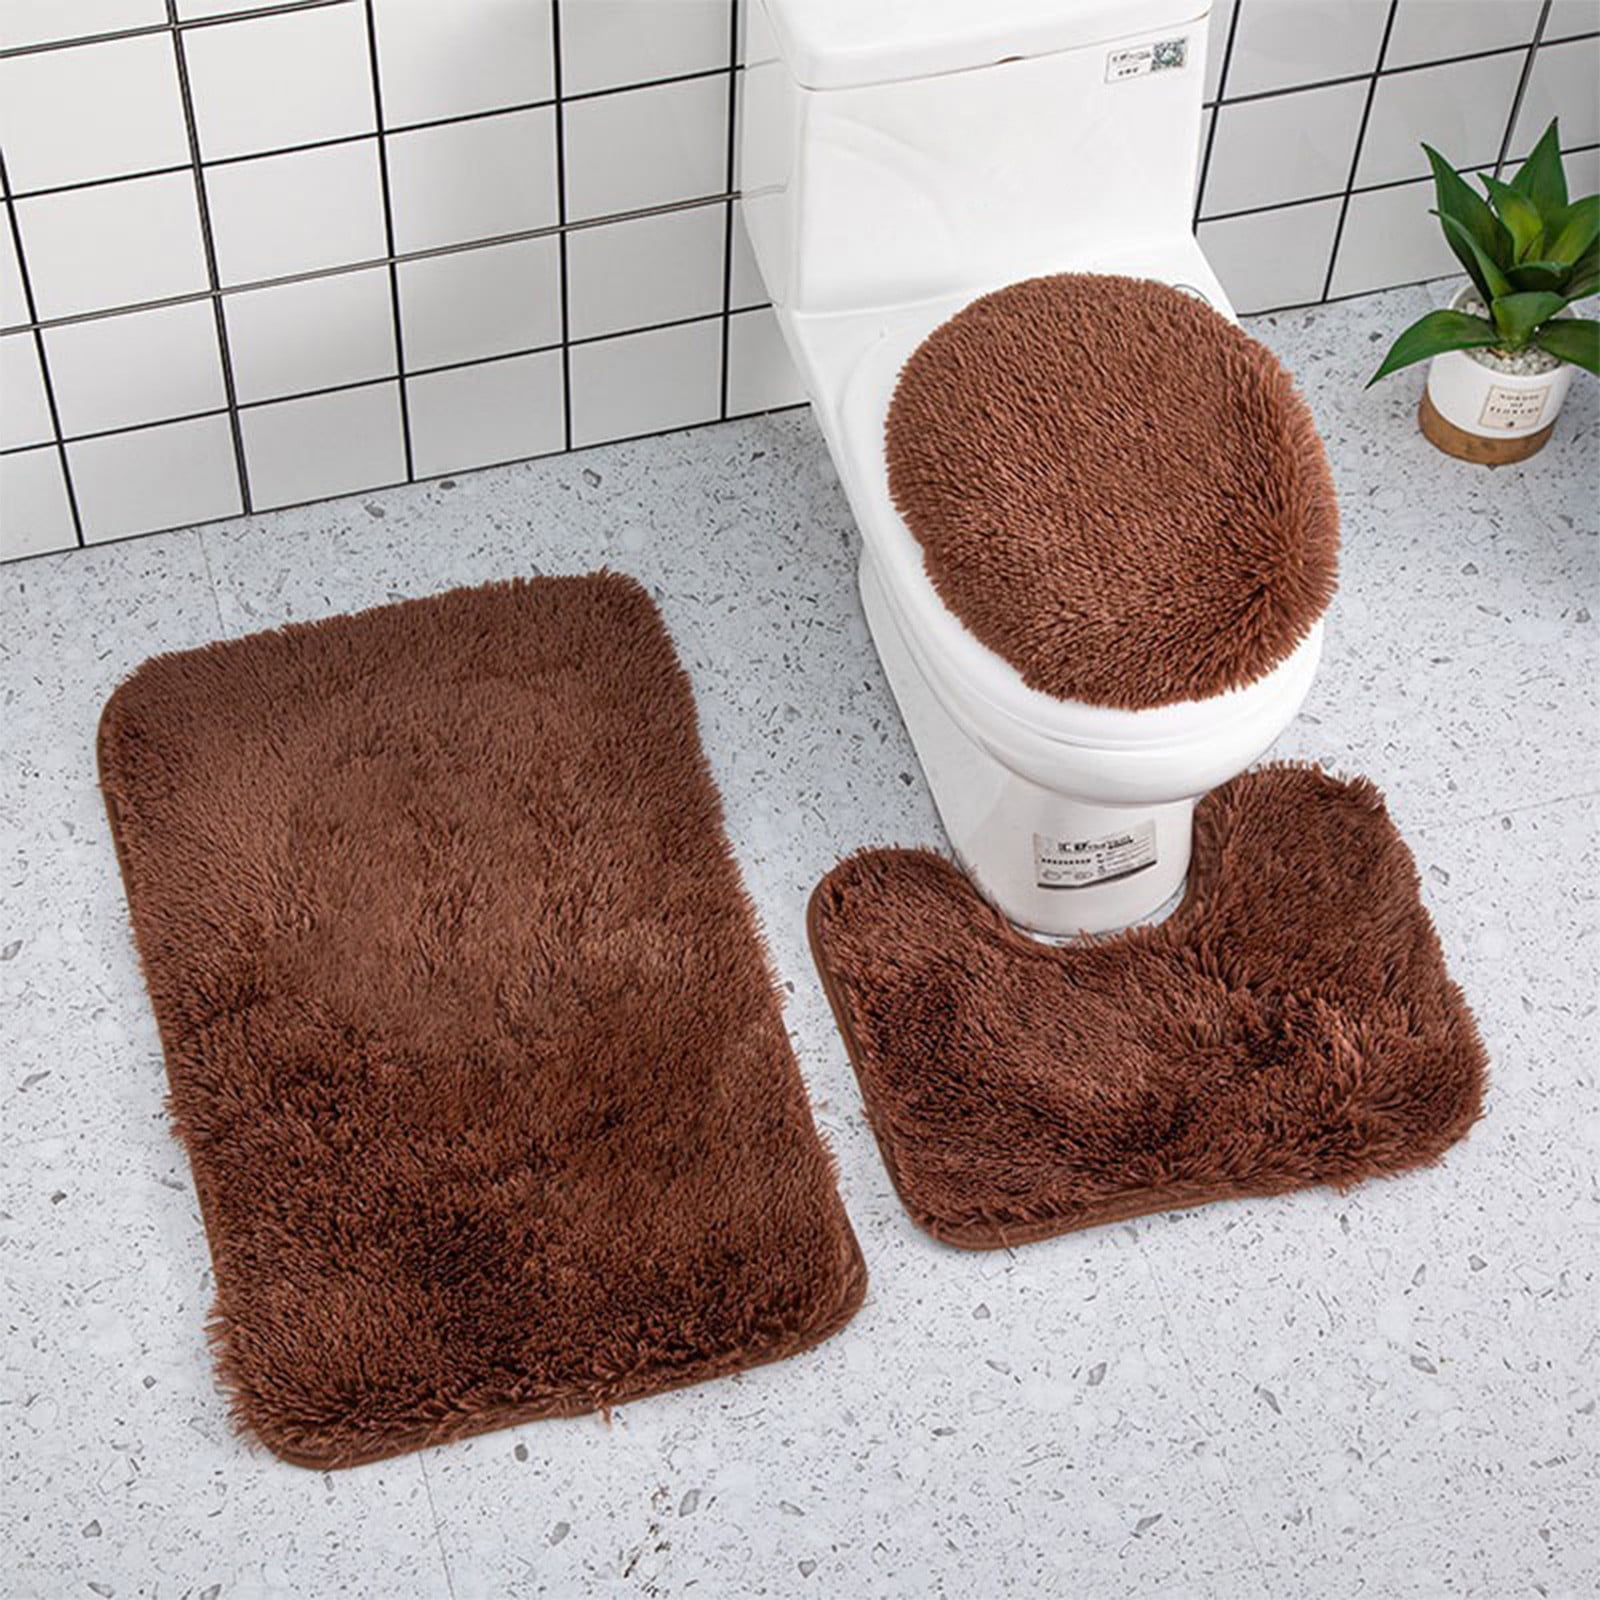 How to Choose the Best Bathroom Rugs